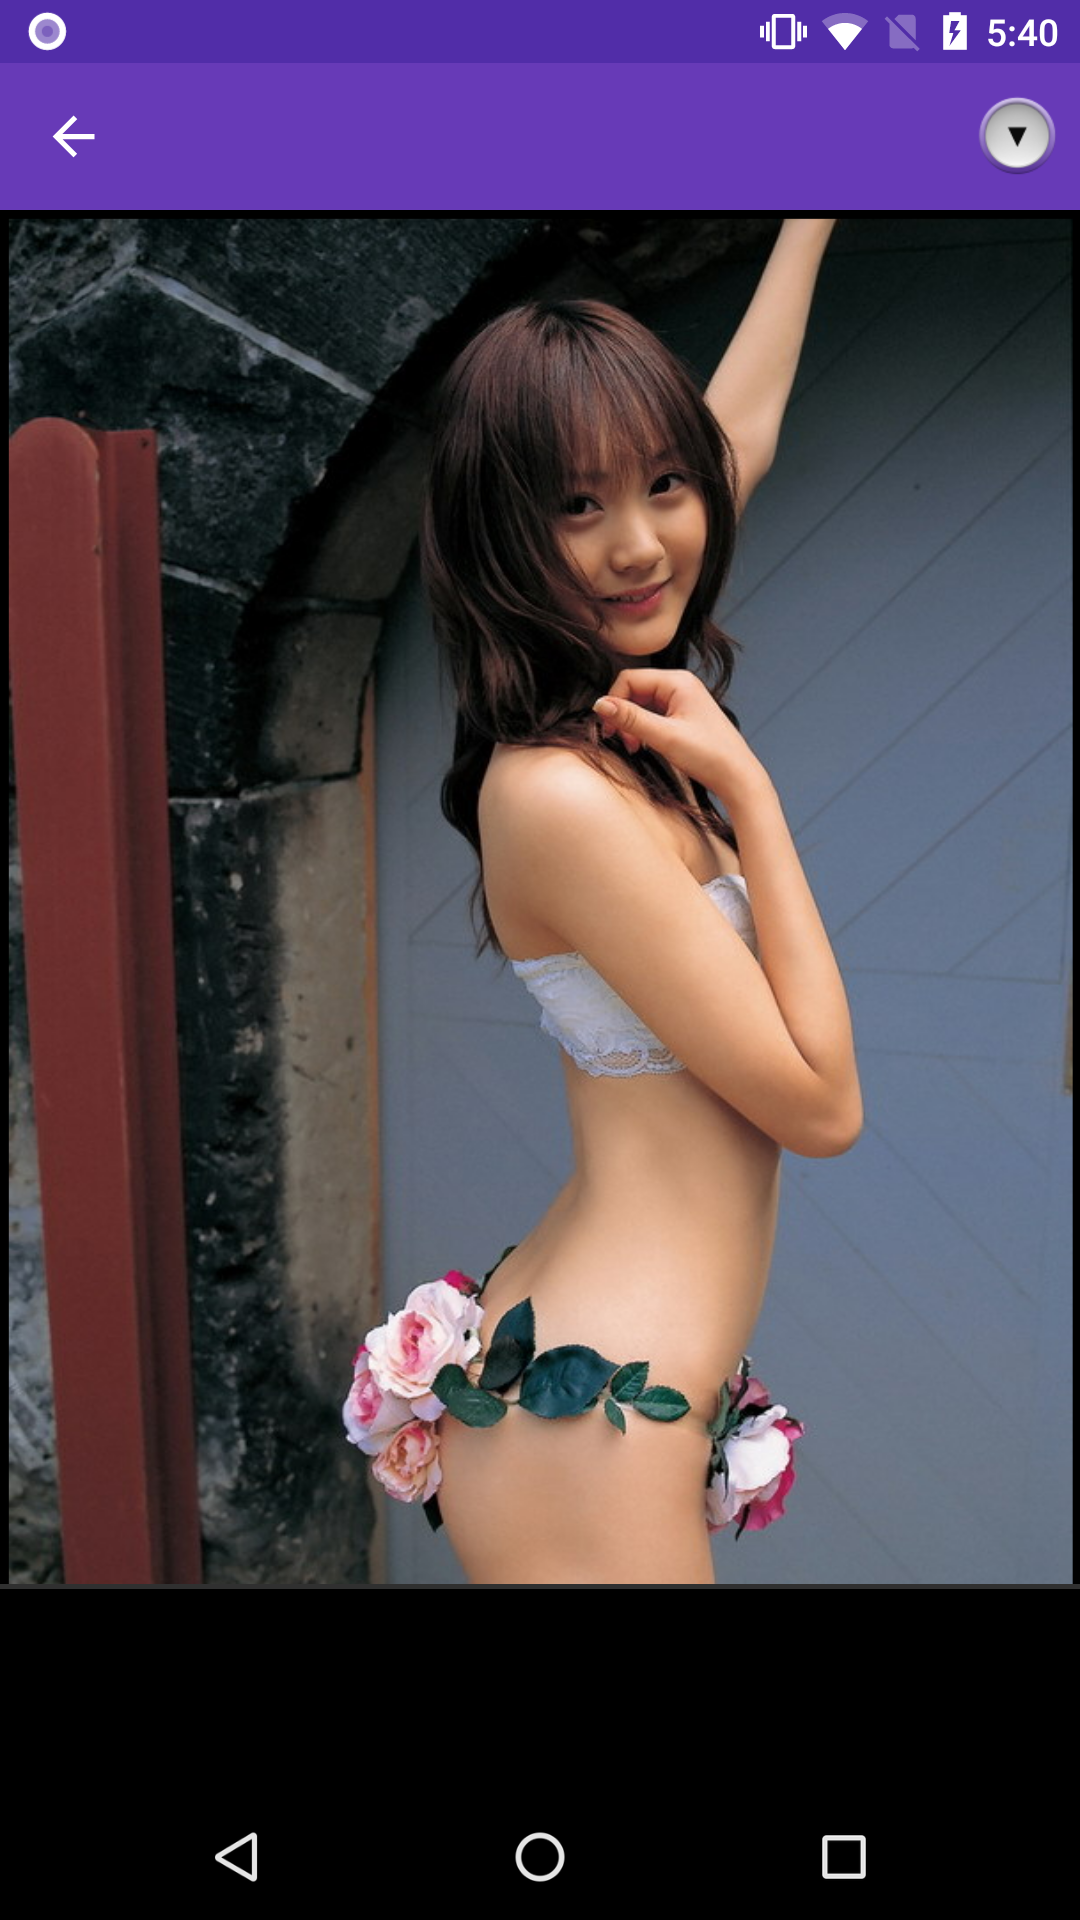 Sexy Asian Girls hentia,android,erotic,porn,app,gallery,hentai,pics,picturd,apps,asian,mobile,china,photos,picture,pornstar,henti,hot,wallpapers,black,apk,girls,korean,japan,amateur,sexy,hintai